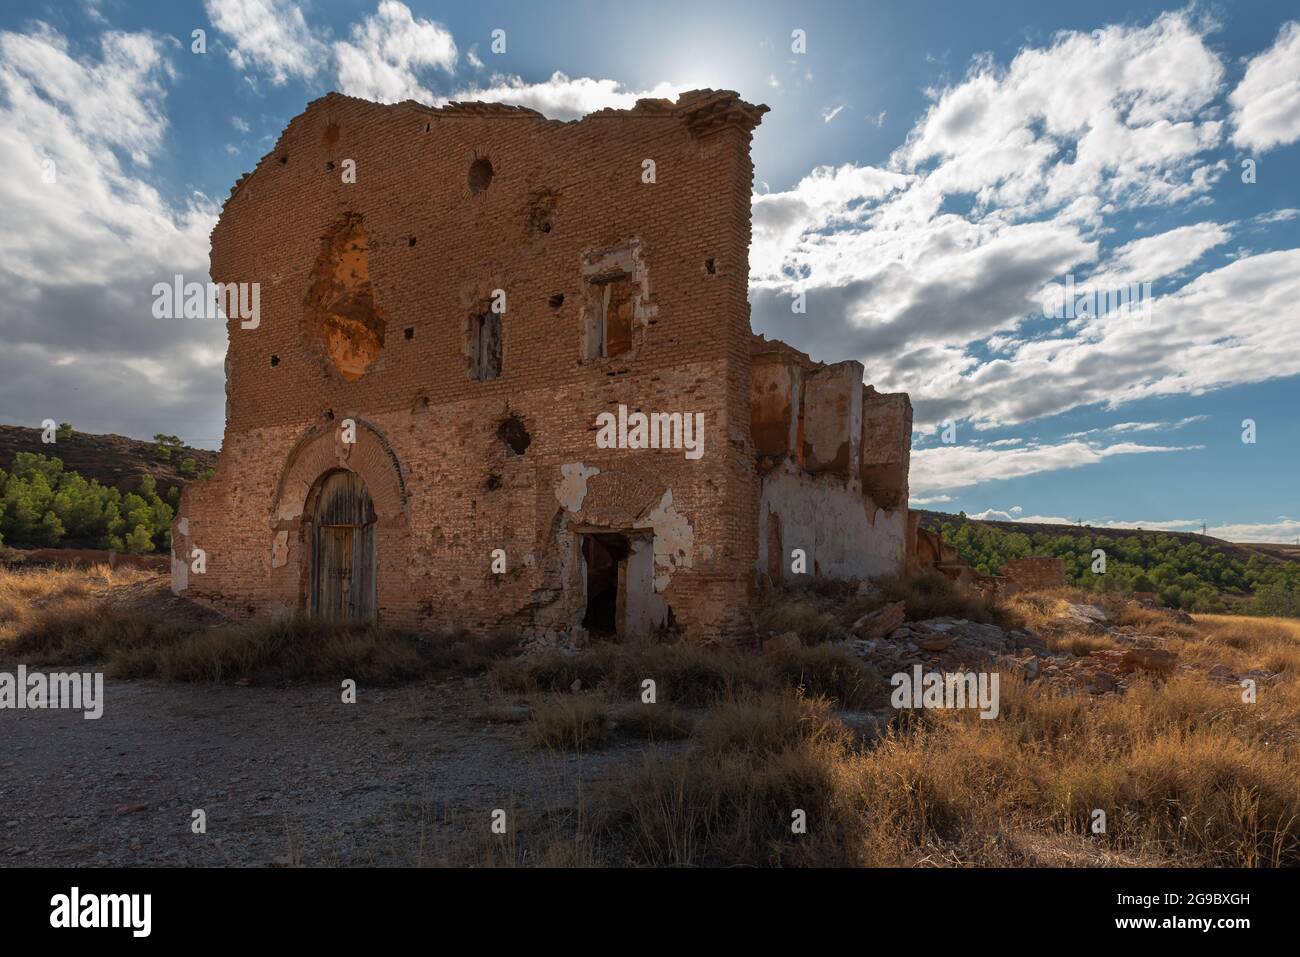 Old Seminary from the Ghost town of Belchite ruined in battle during Spanish Civil War, Zaragoza Stock Photo